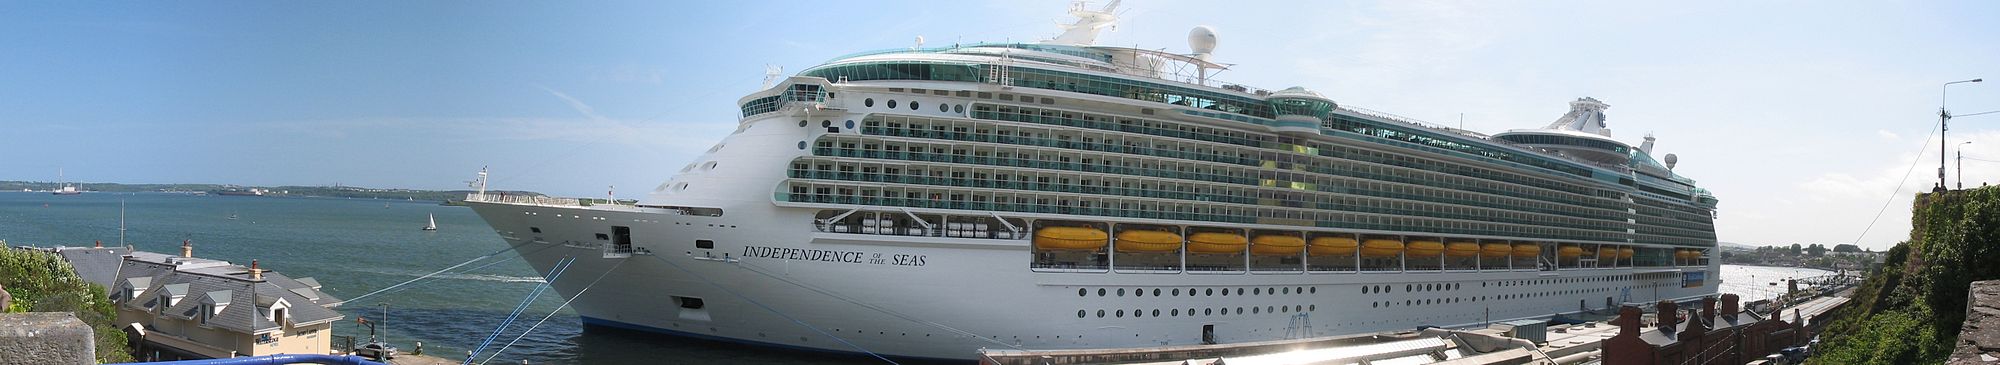 Independence of the Seas in Cobh, Irland